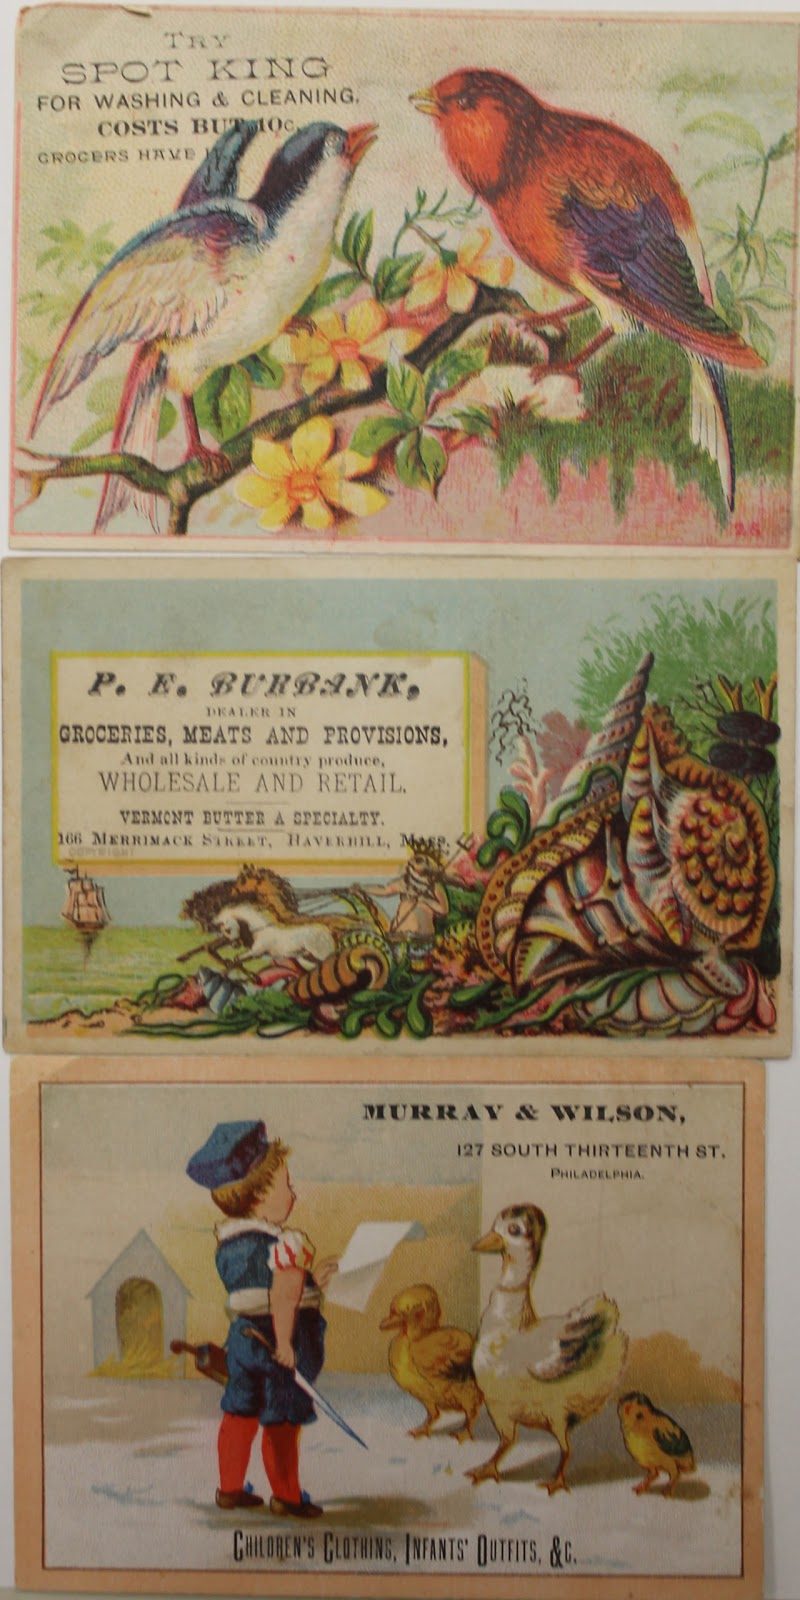 Three trading card advertisements aligned over one another, one depicting birds, another shows a snail, and the third a boy with ducks